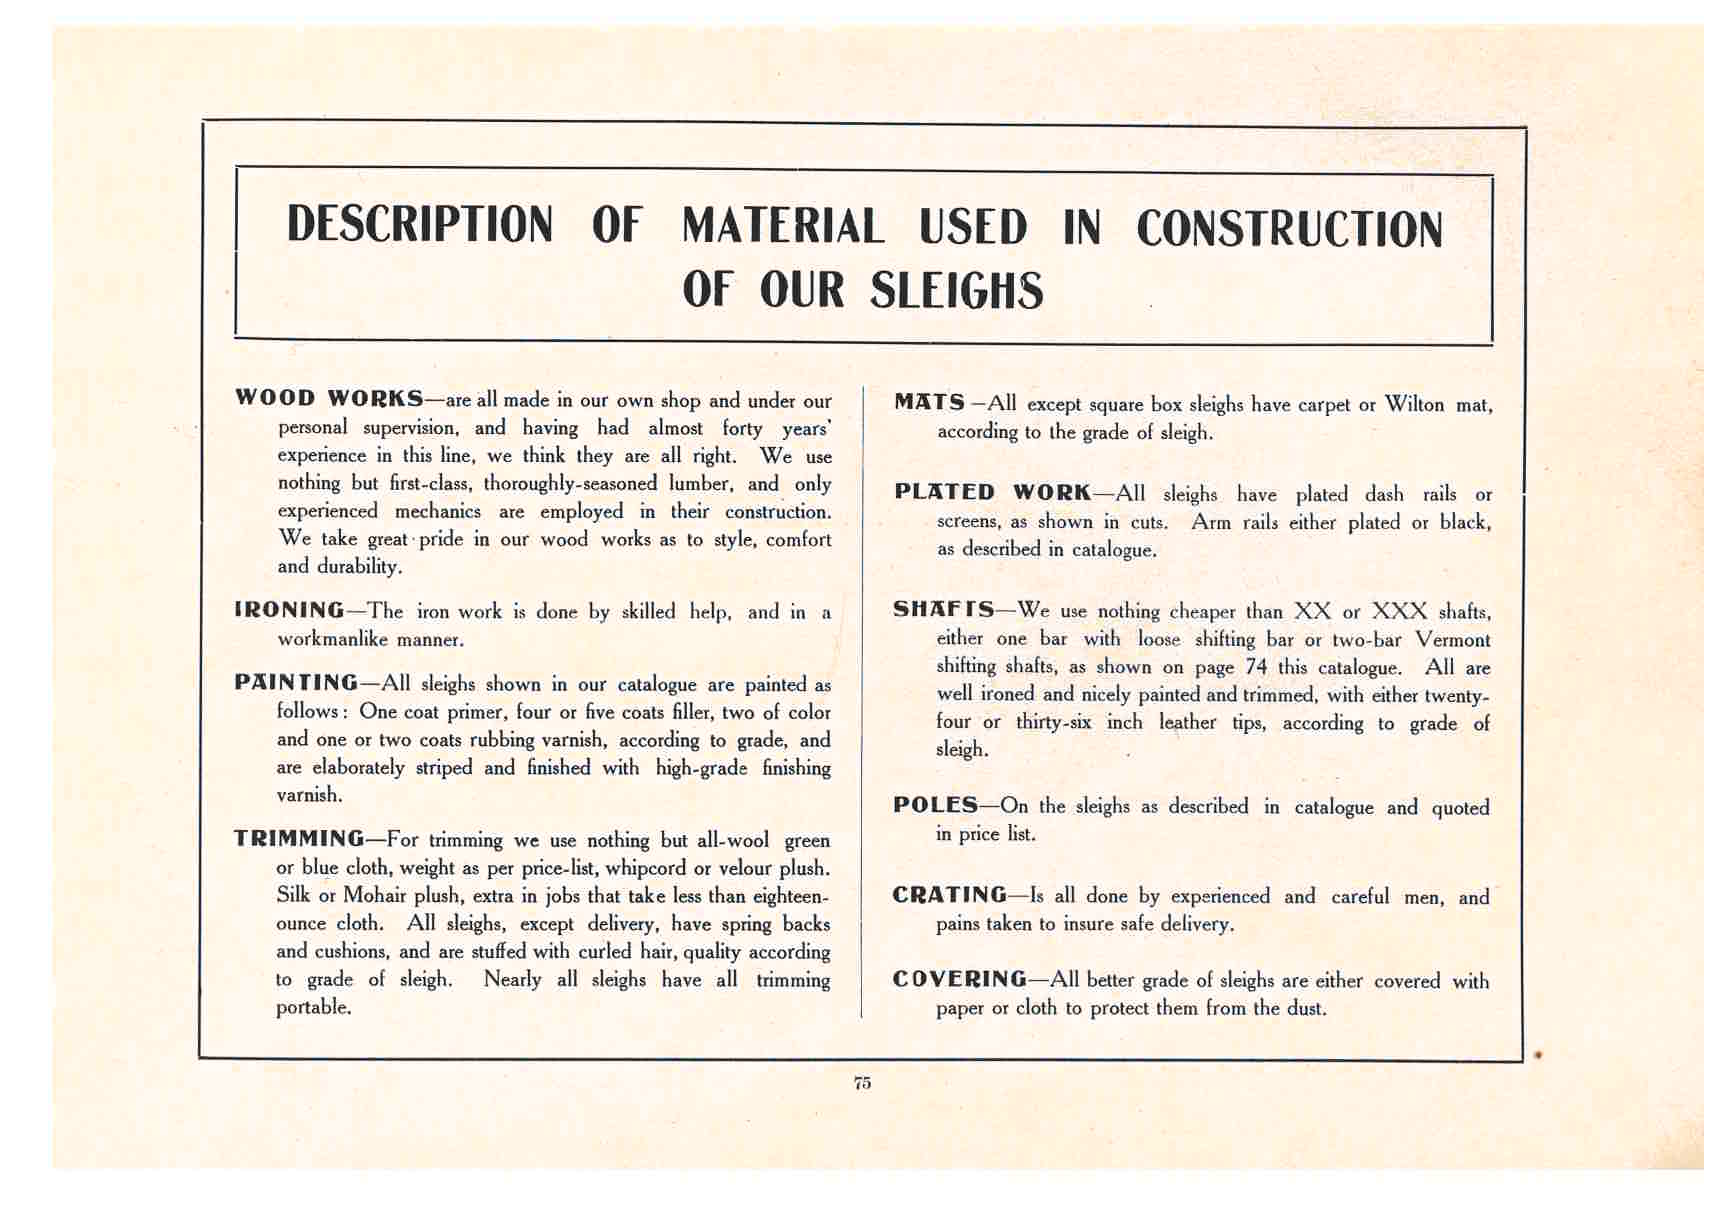 general description of material used to construct the sleighs